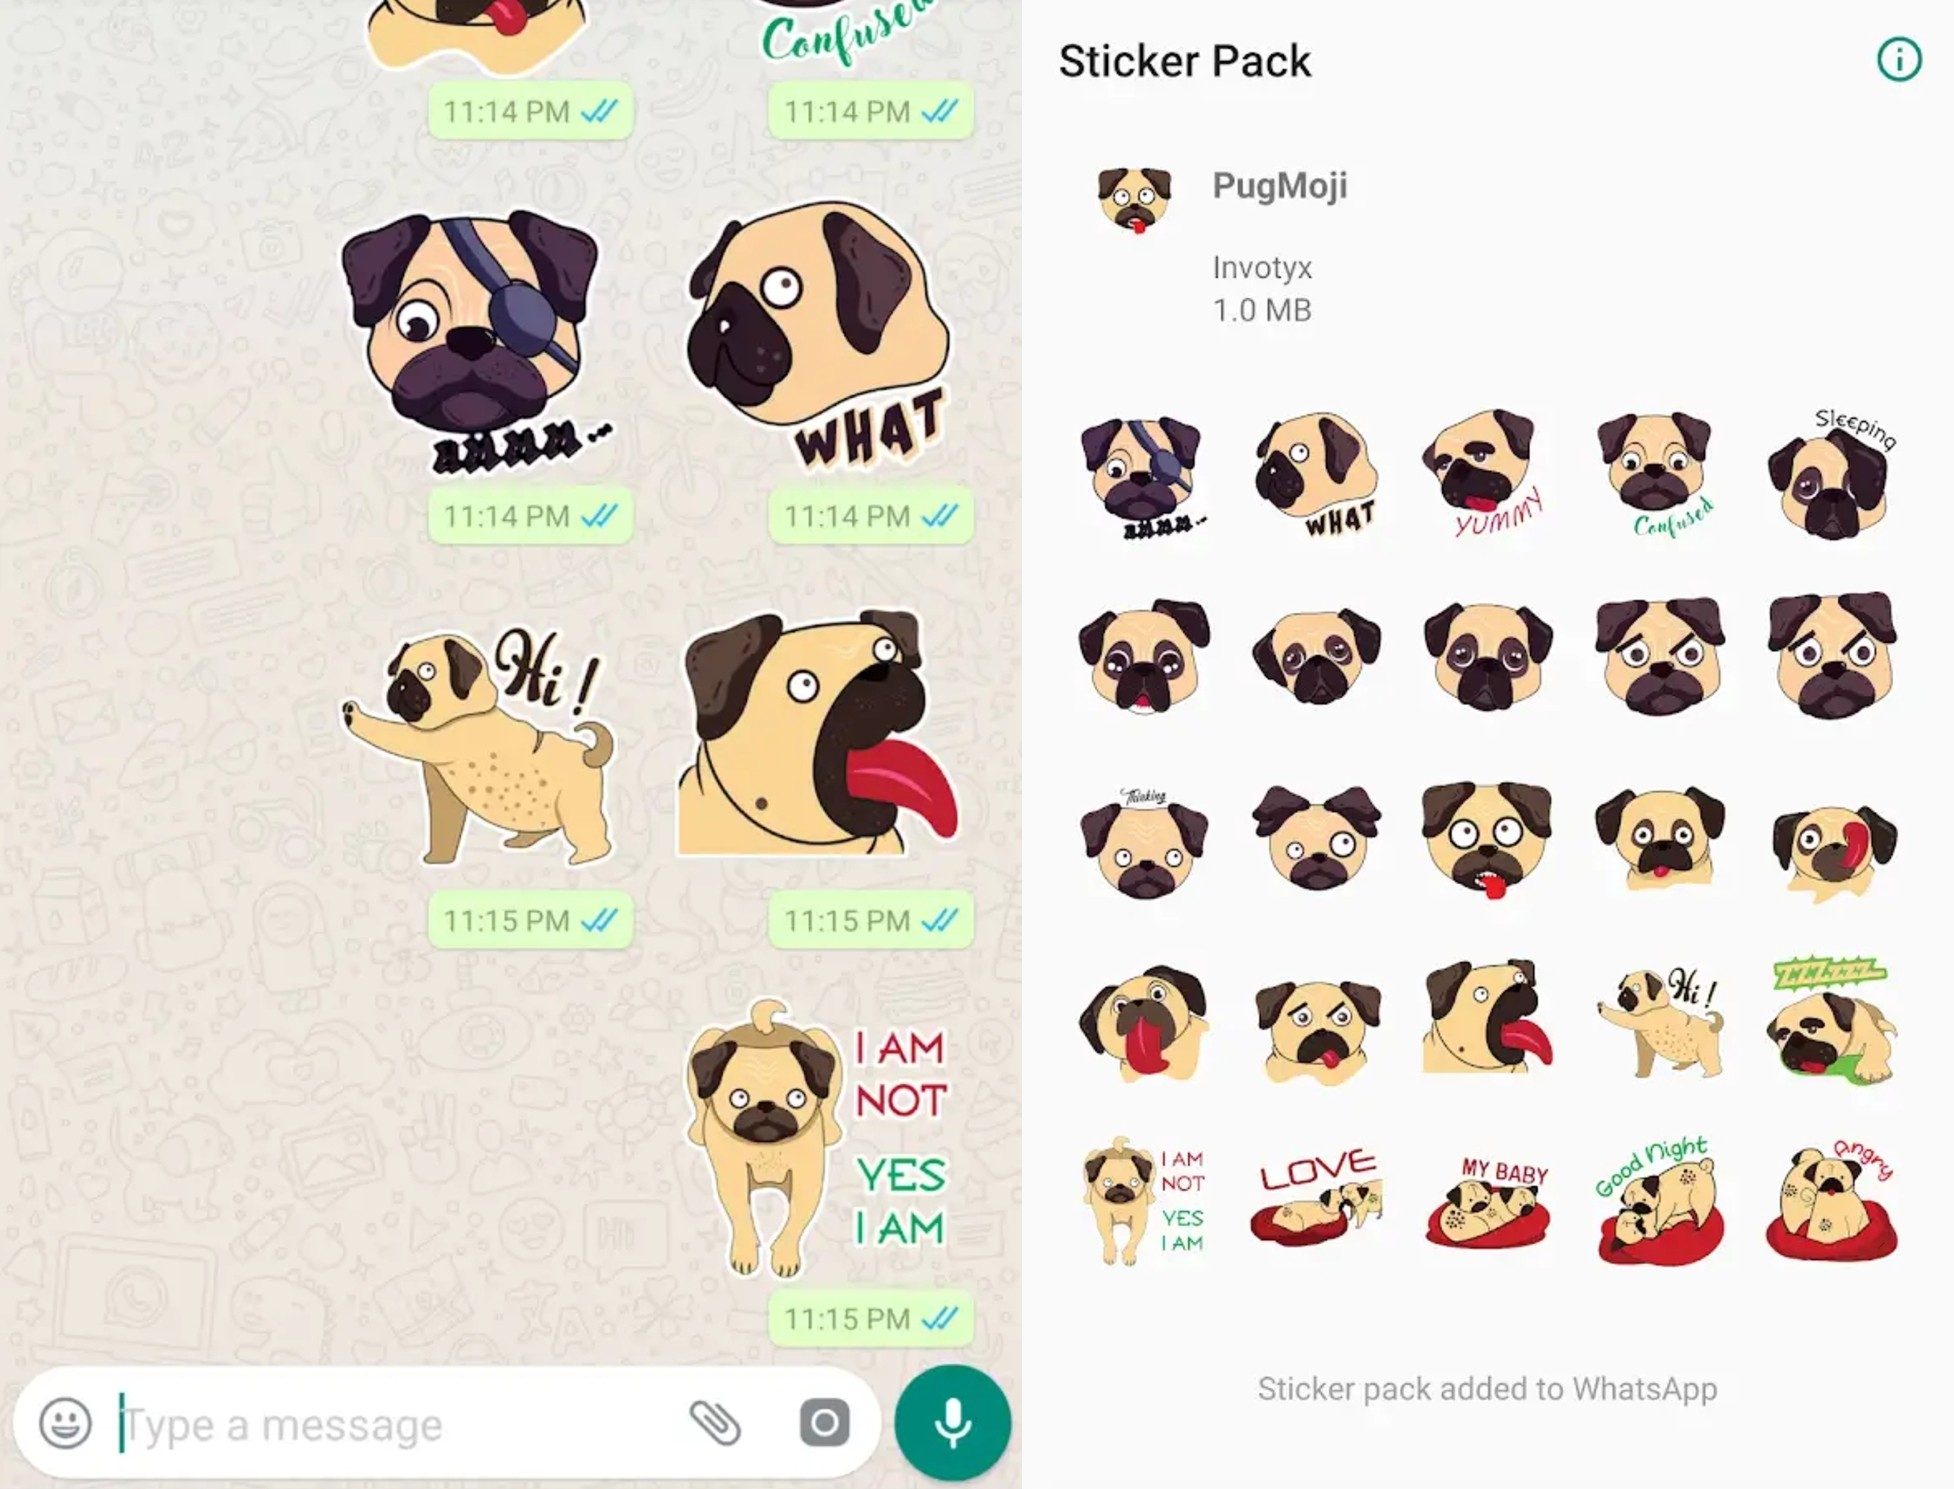 Top 51 WhatsApp stickers you should use [Download] Personal stickers added